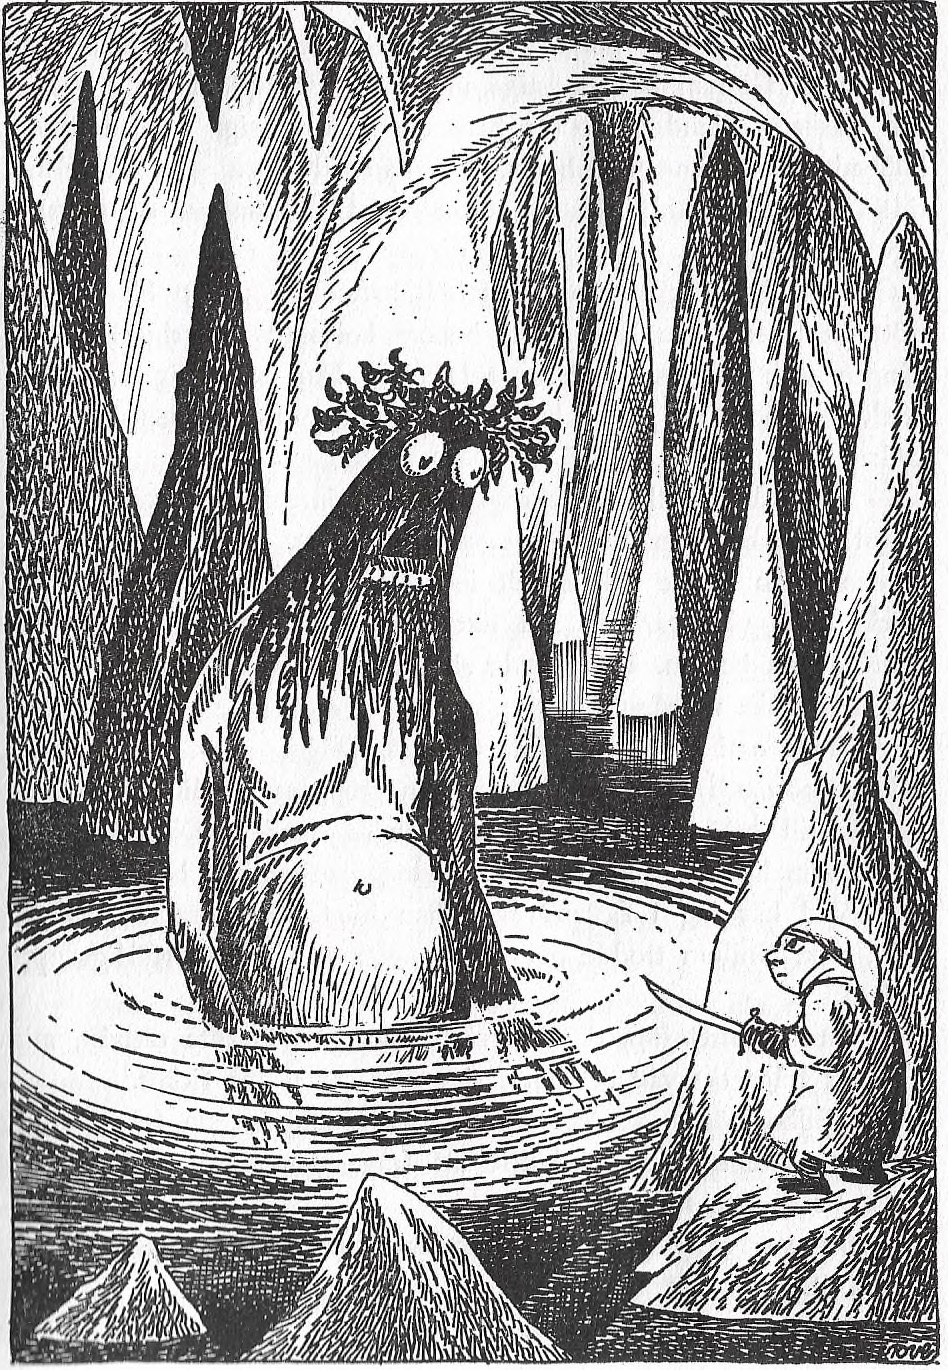 A illustration from The Hobbit.